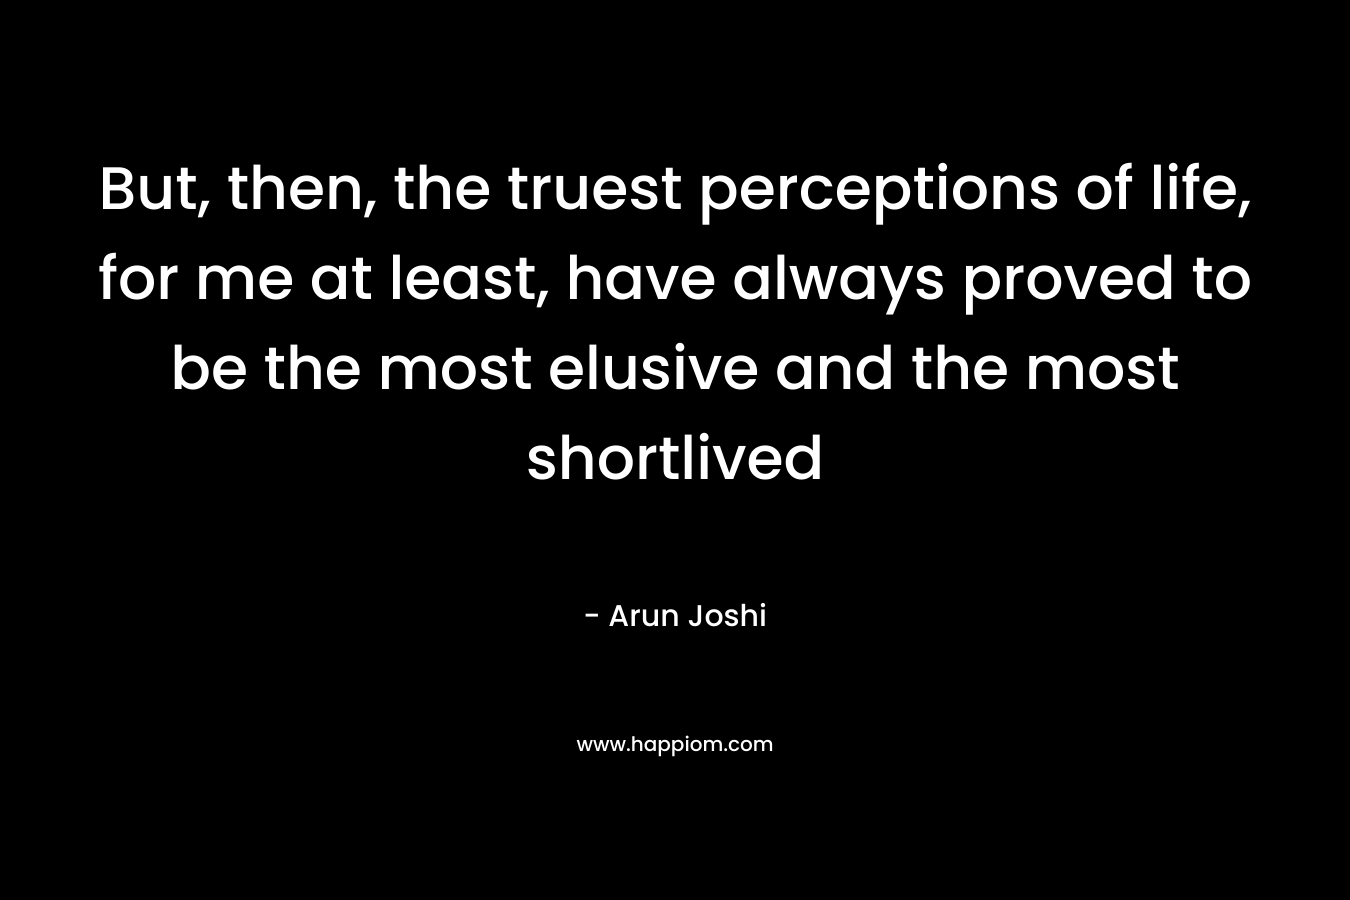 But, then, the truest perceptions of life, for me at least, have always proved to be the most elusive and the most shortlived